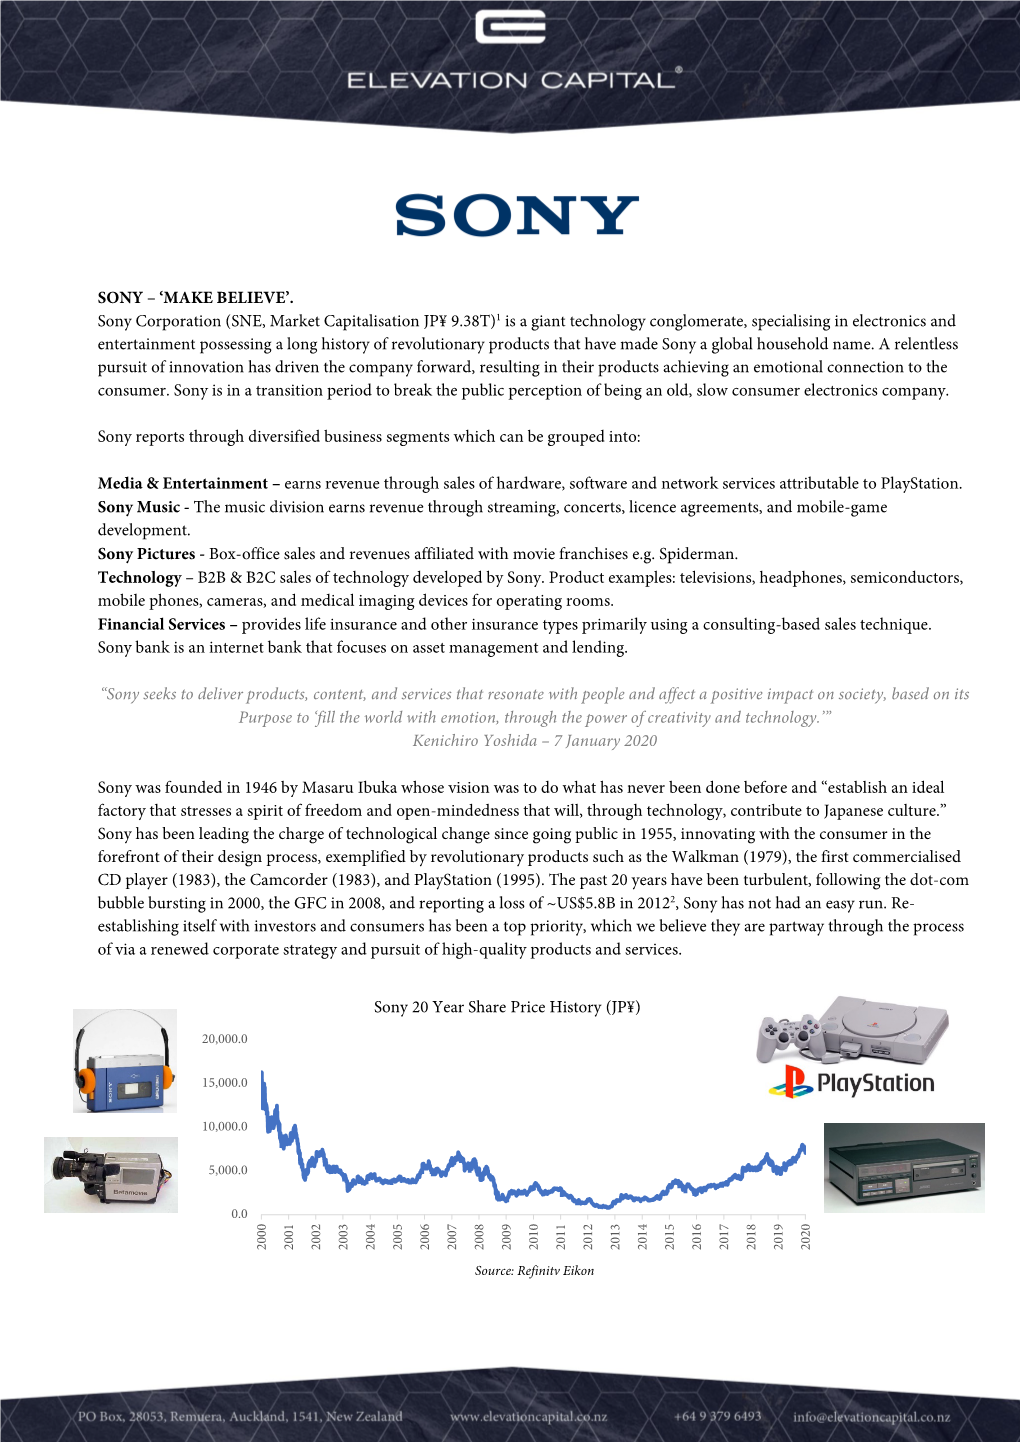 SONY – 'MAKE BELIEVE'. Sony Corporation (SNE, Market Capitalisation JP¥ 9.38T)1 Is a Giant Technology Conglomerate, Speci